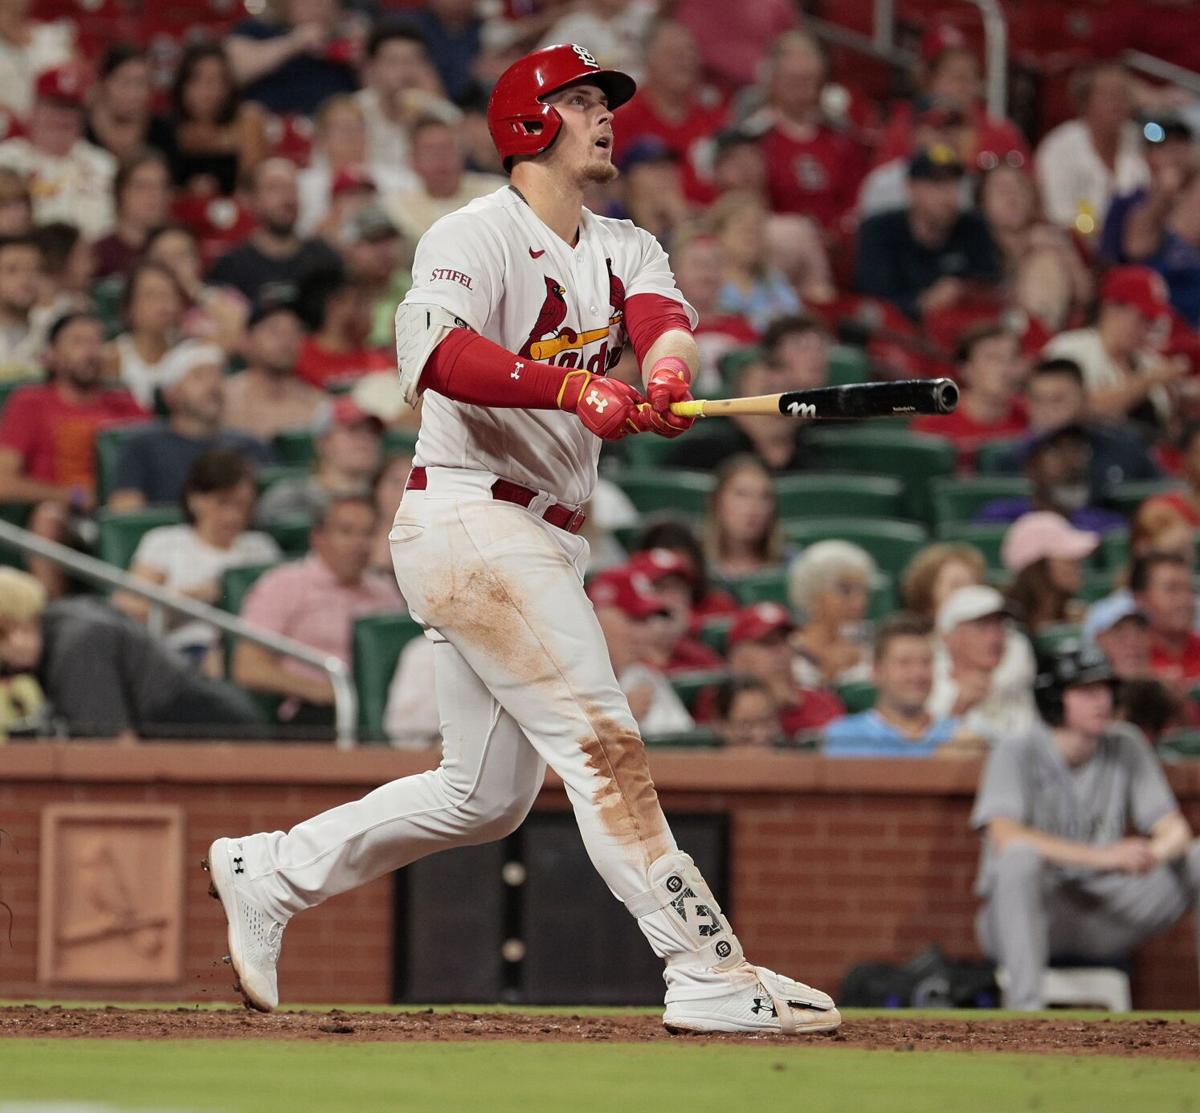 Is Coors Field Just What The Doctor Ordered To Jumpstart This St. Louis  Cardinals Offense? 